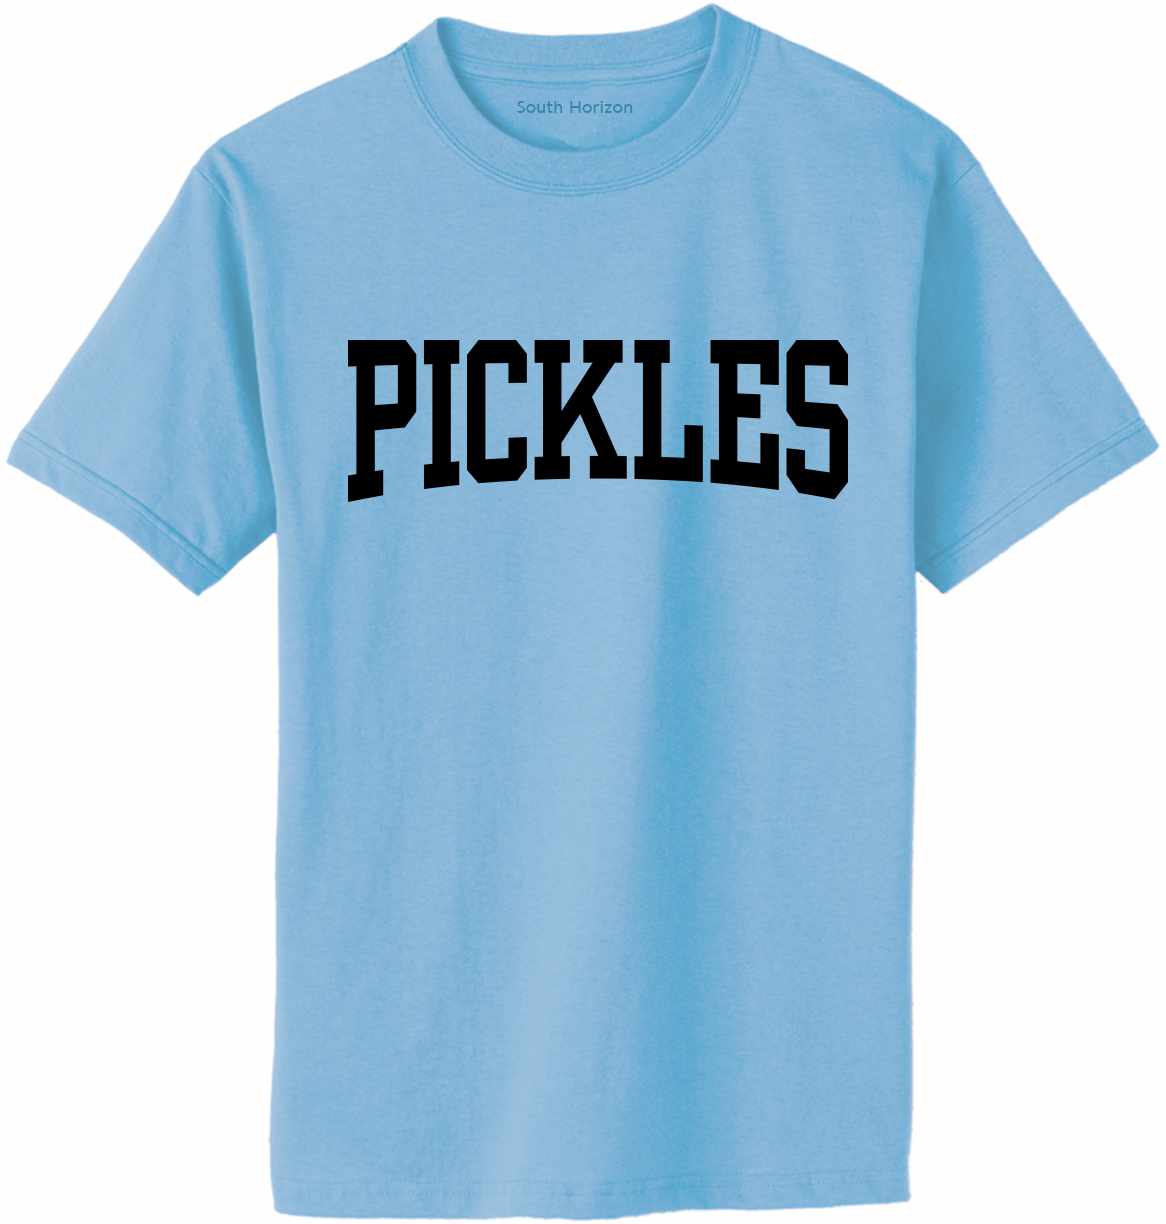 Pickles on Adult T-Shirt (#1384-1)